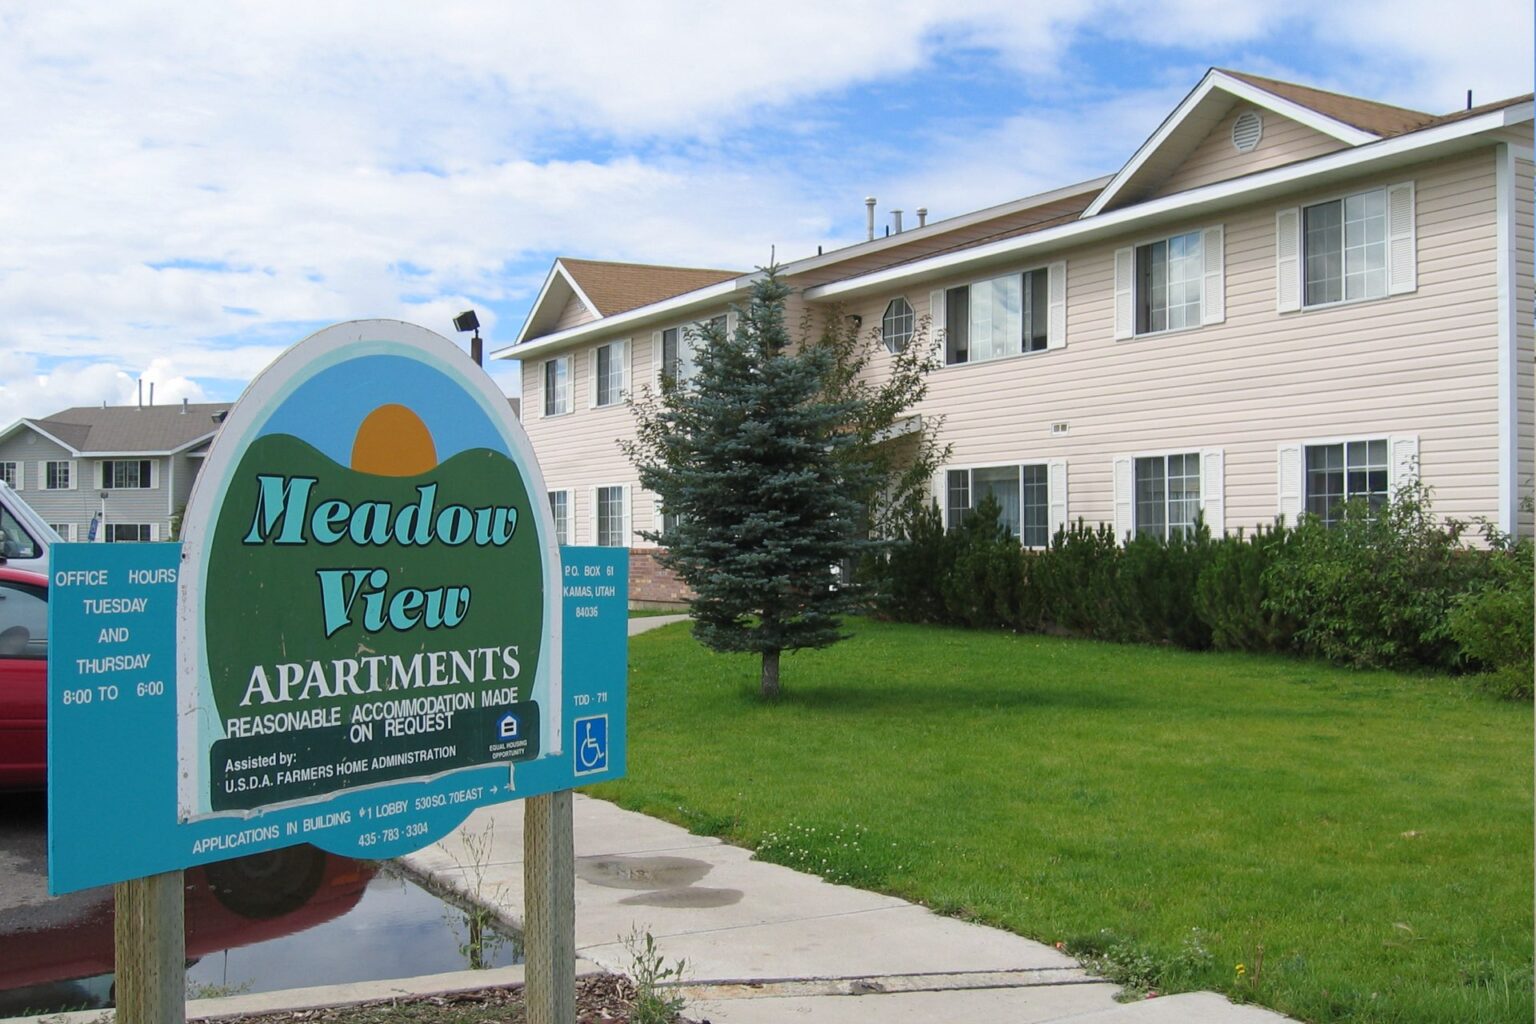 Meadow View Apartments - community housing project by Mountainlands Community Housing Trust